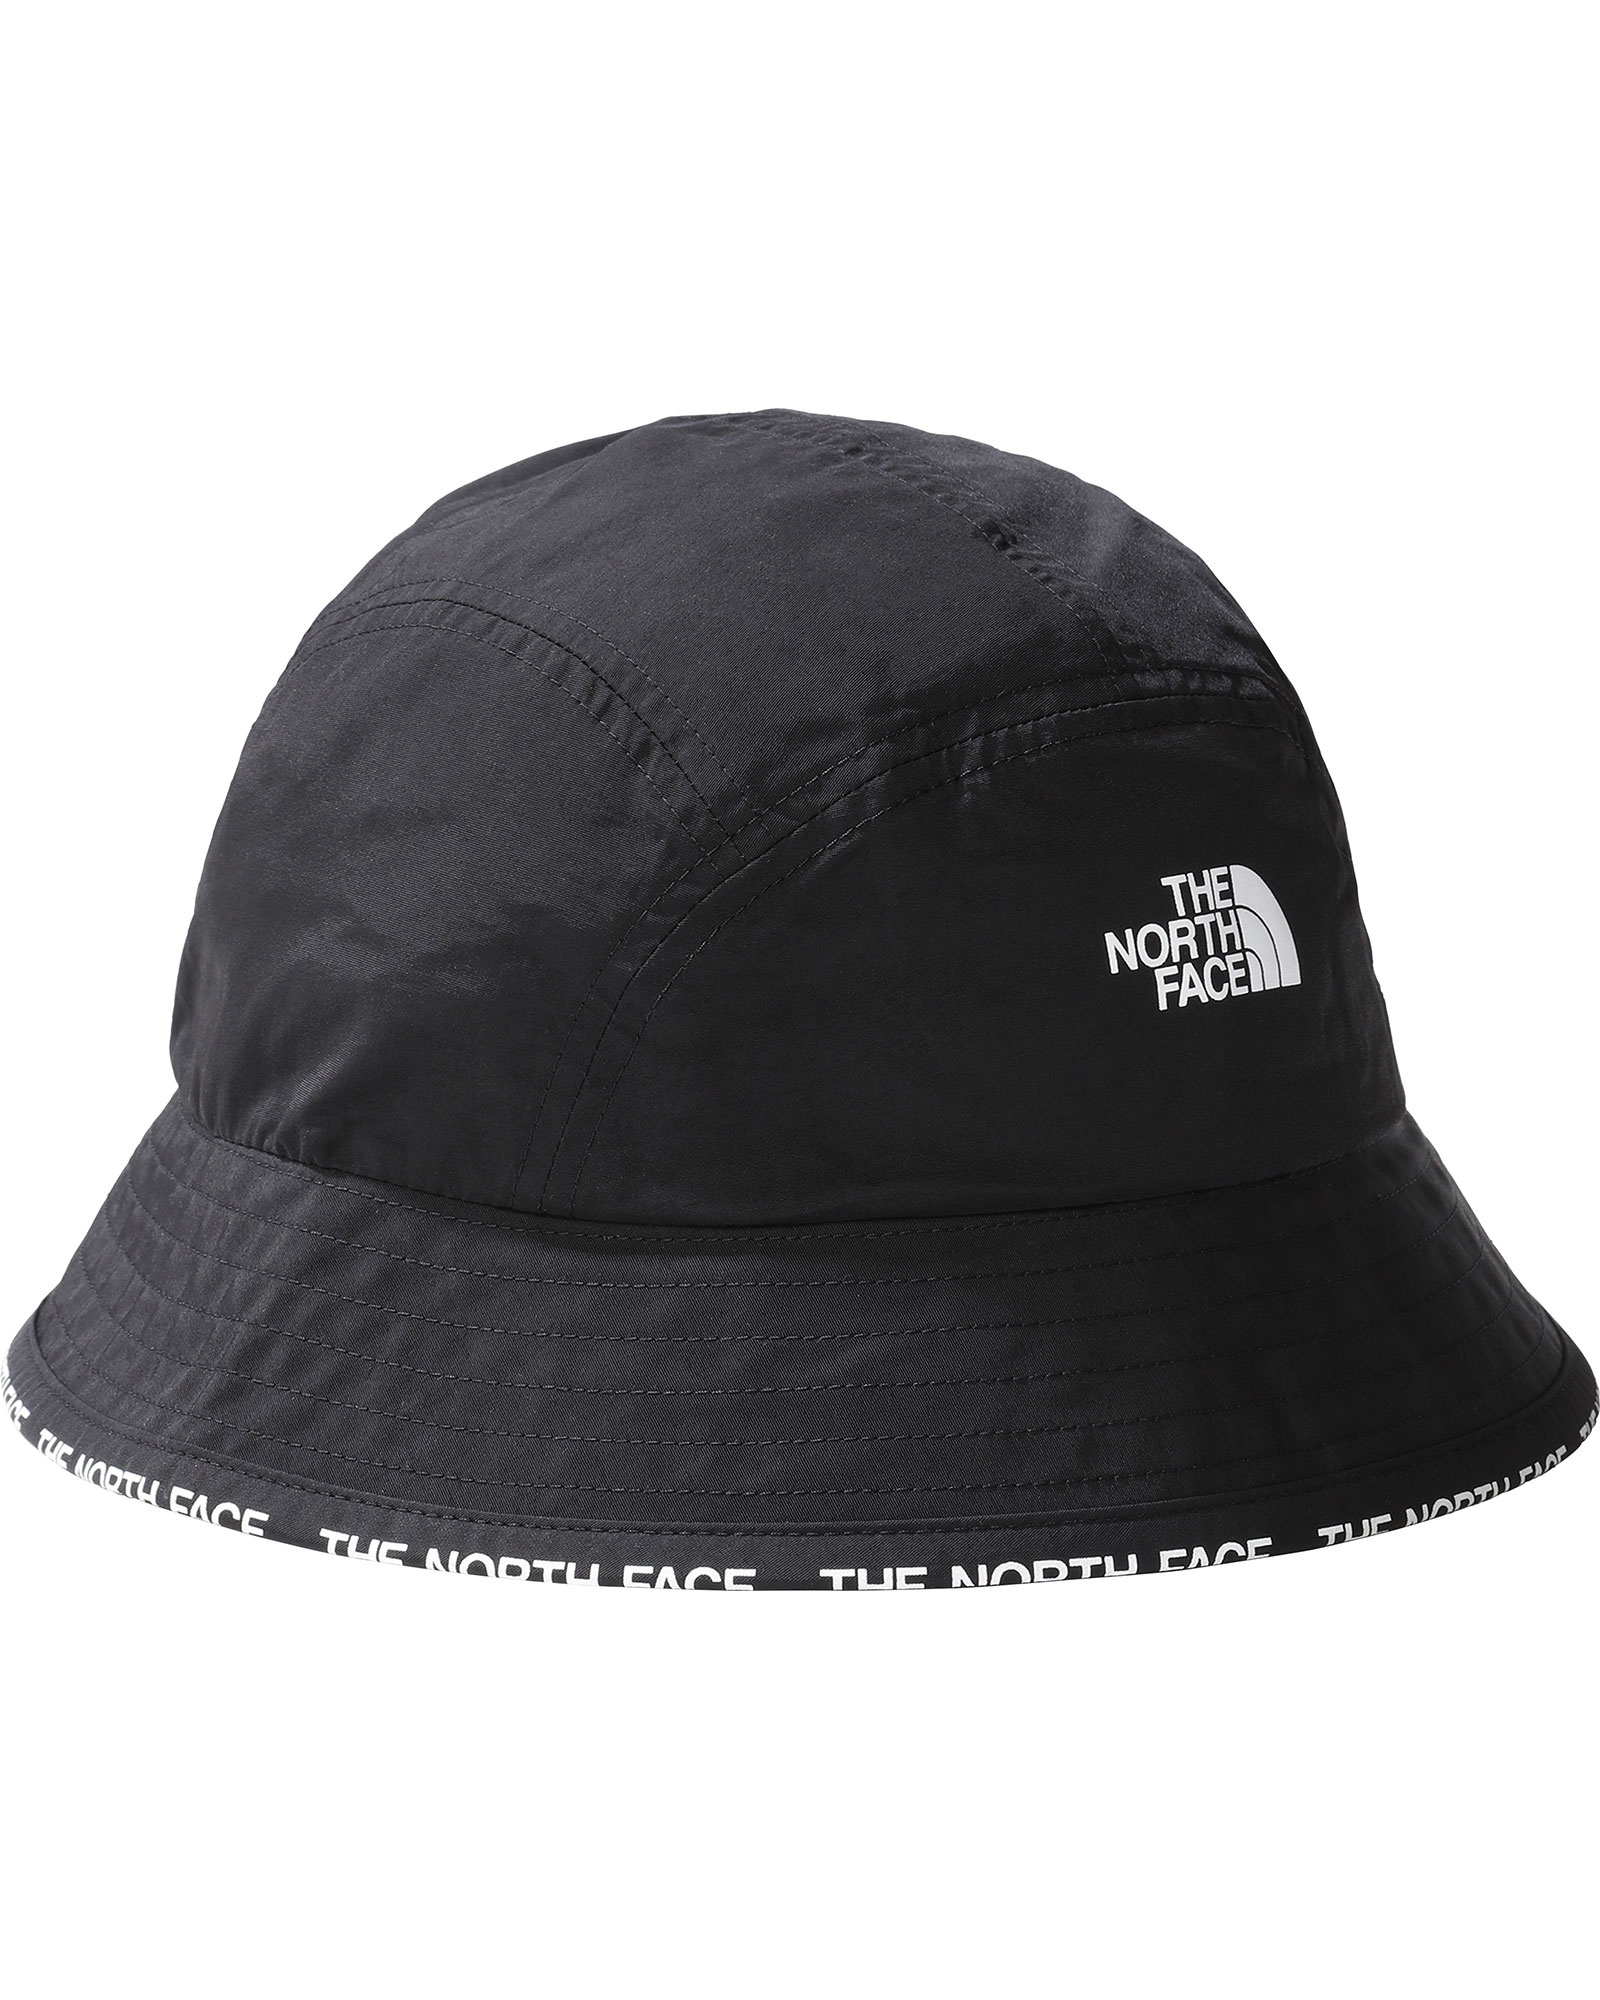 The North Face Cypress Bucket Hat - TNF Black S/M